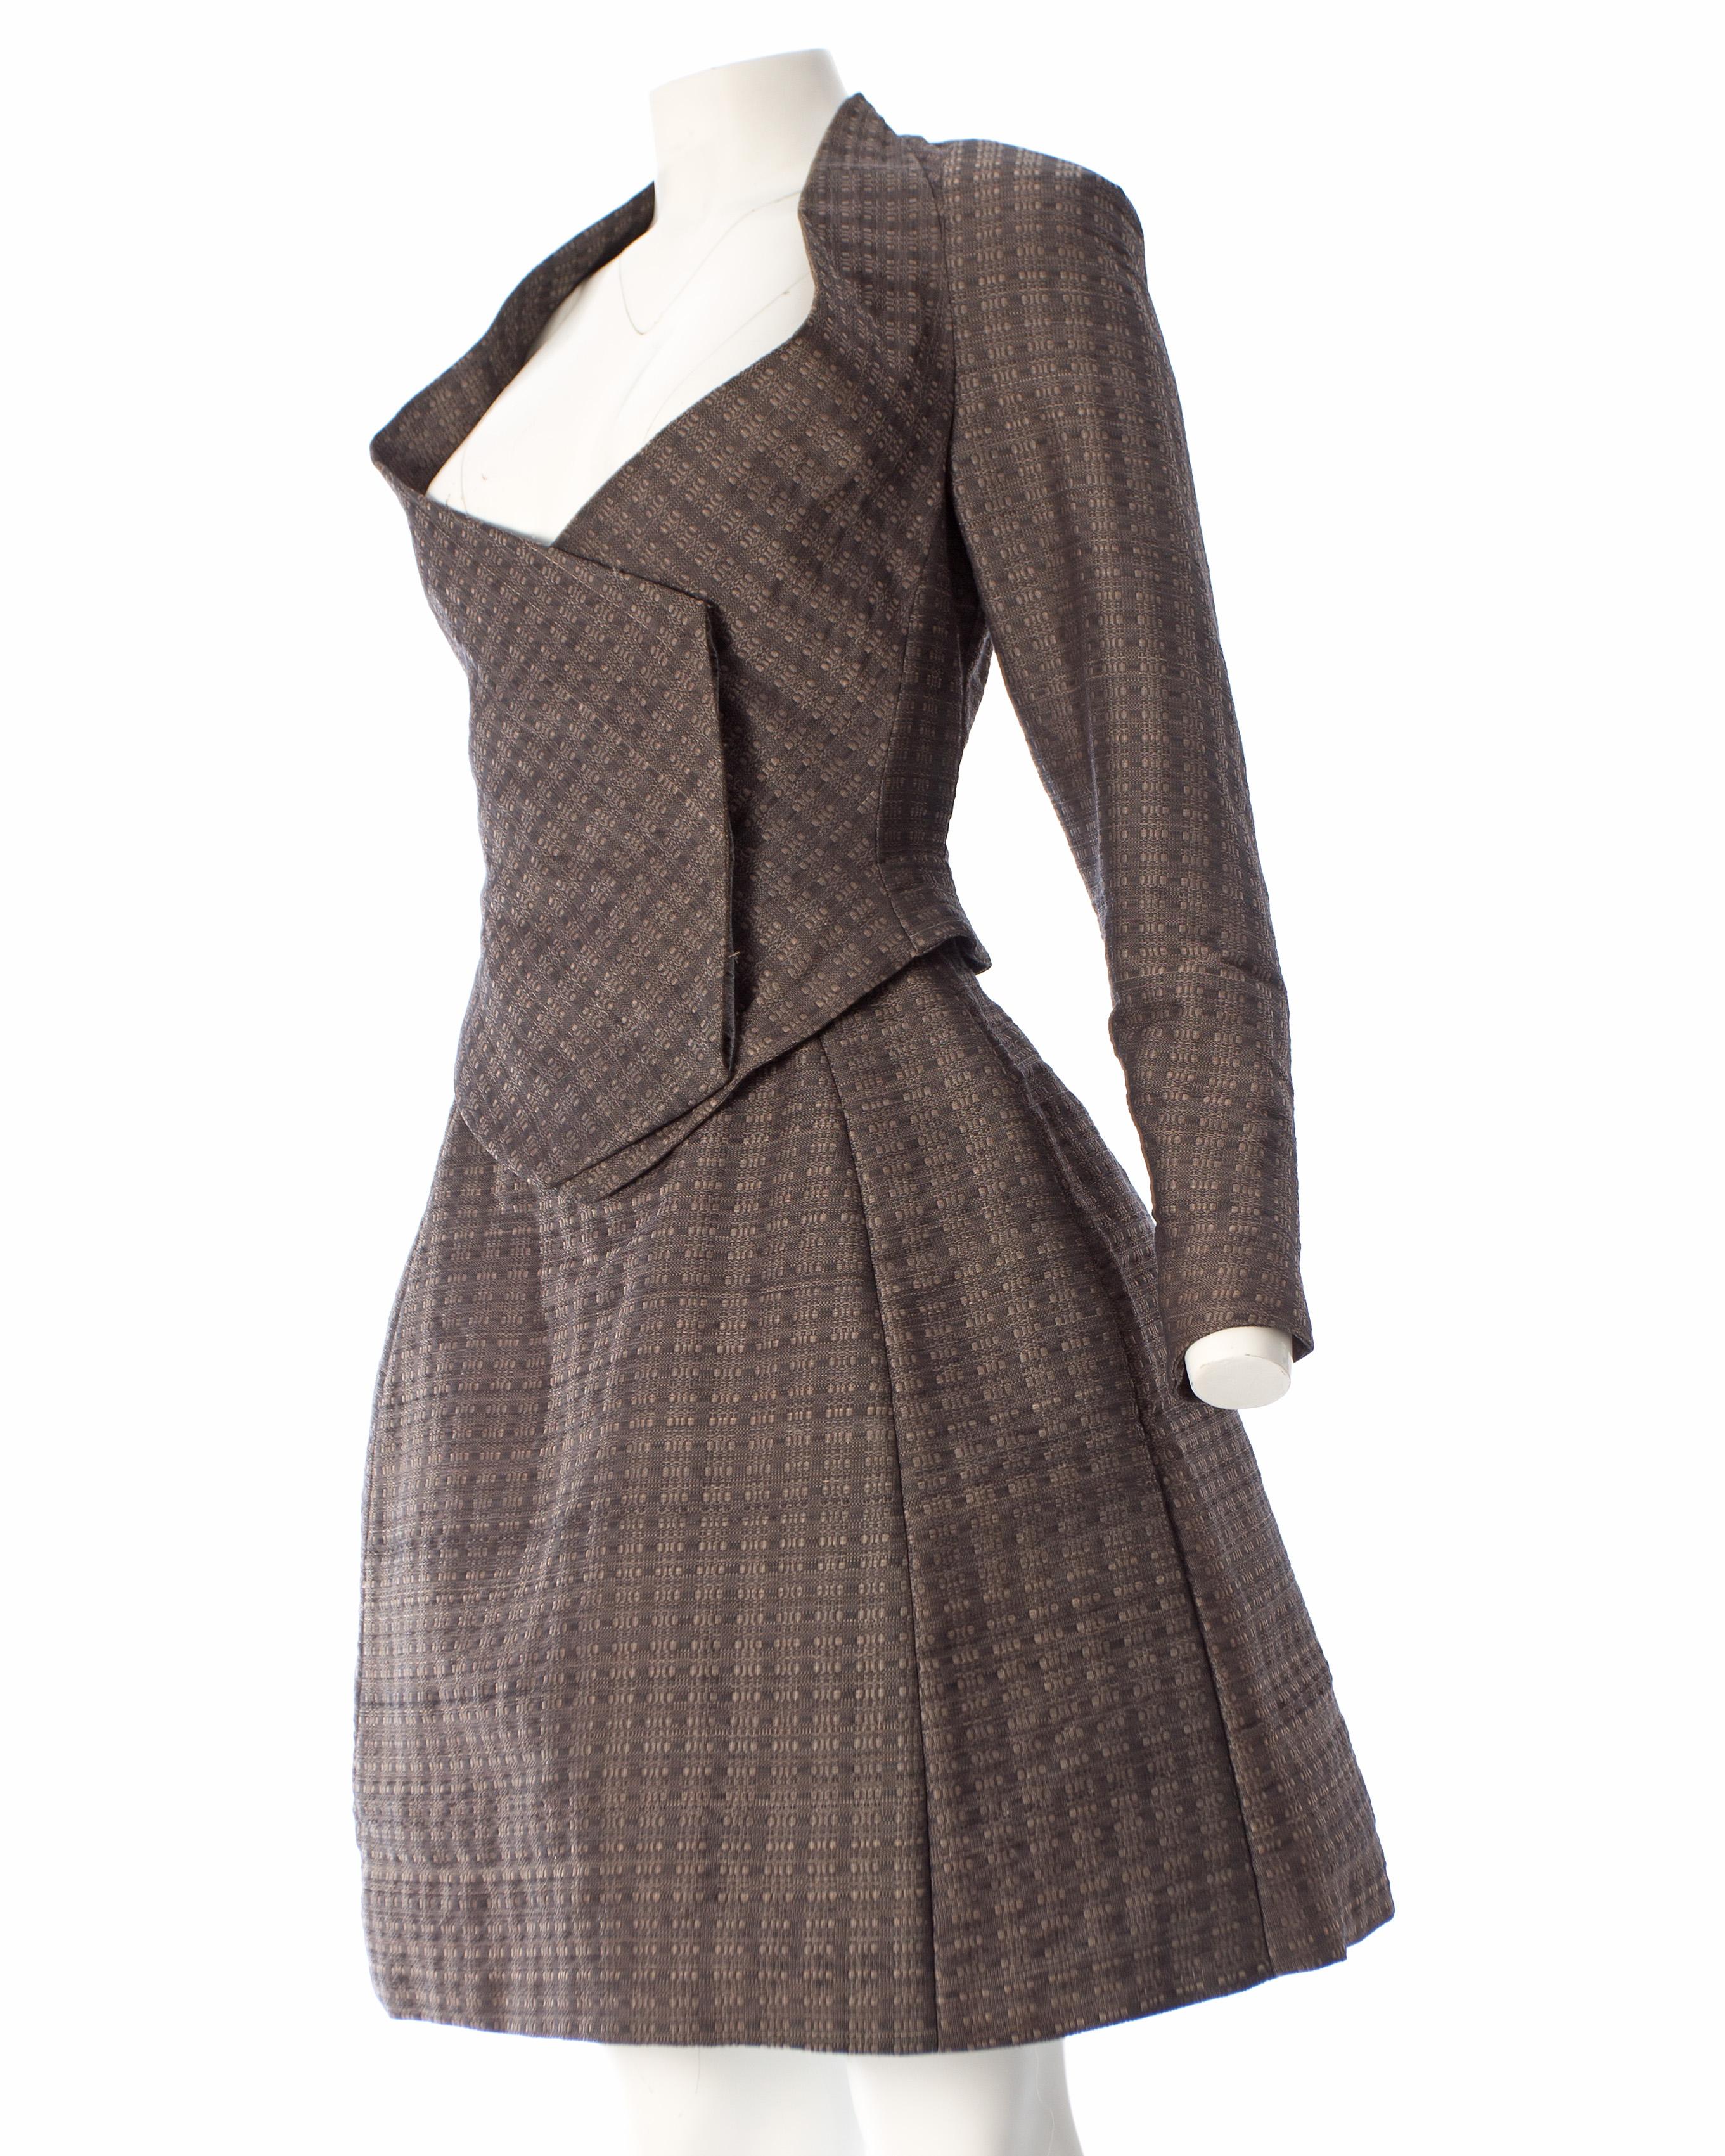 Vivienne Westwood mauve brocade structured skirt suit, fw 1997  In Good Condition For Sale In London, GB